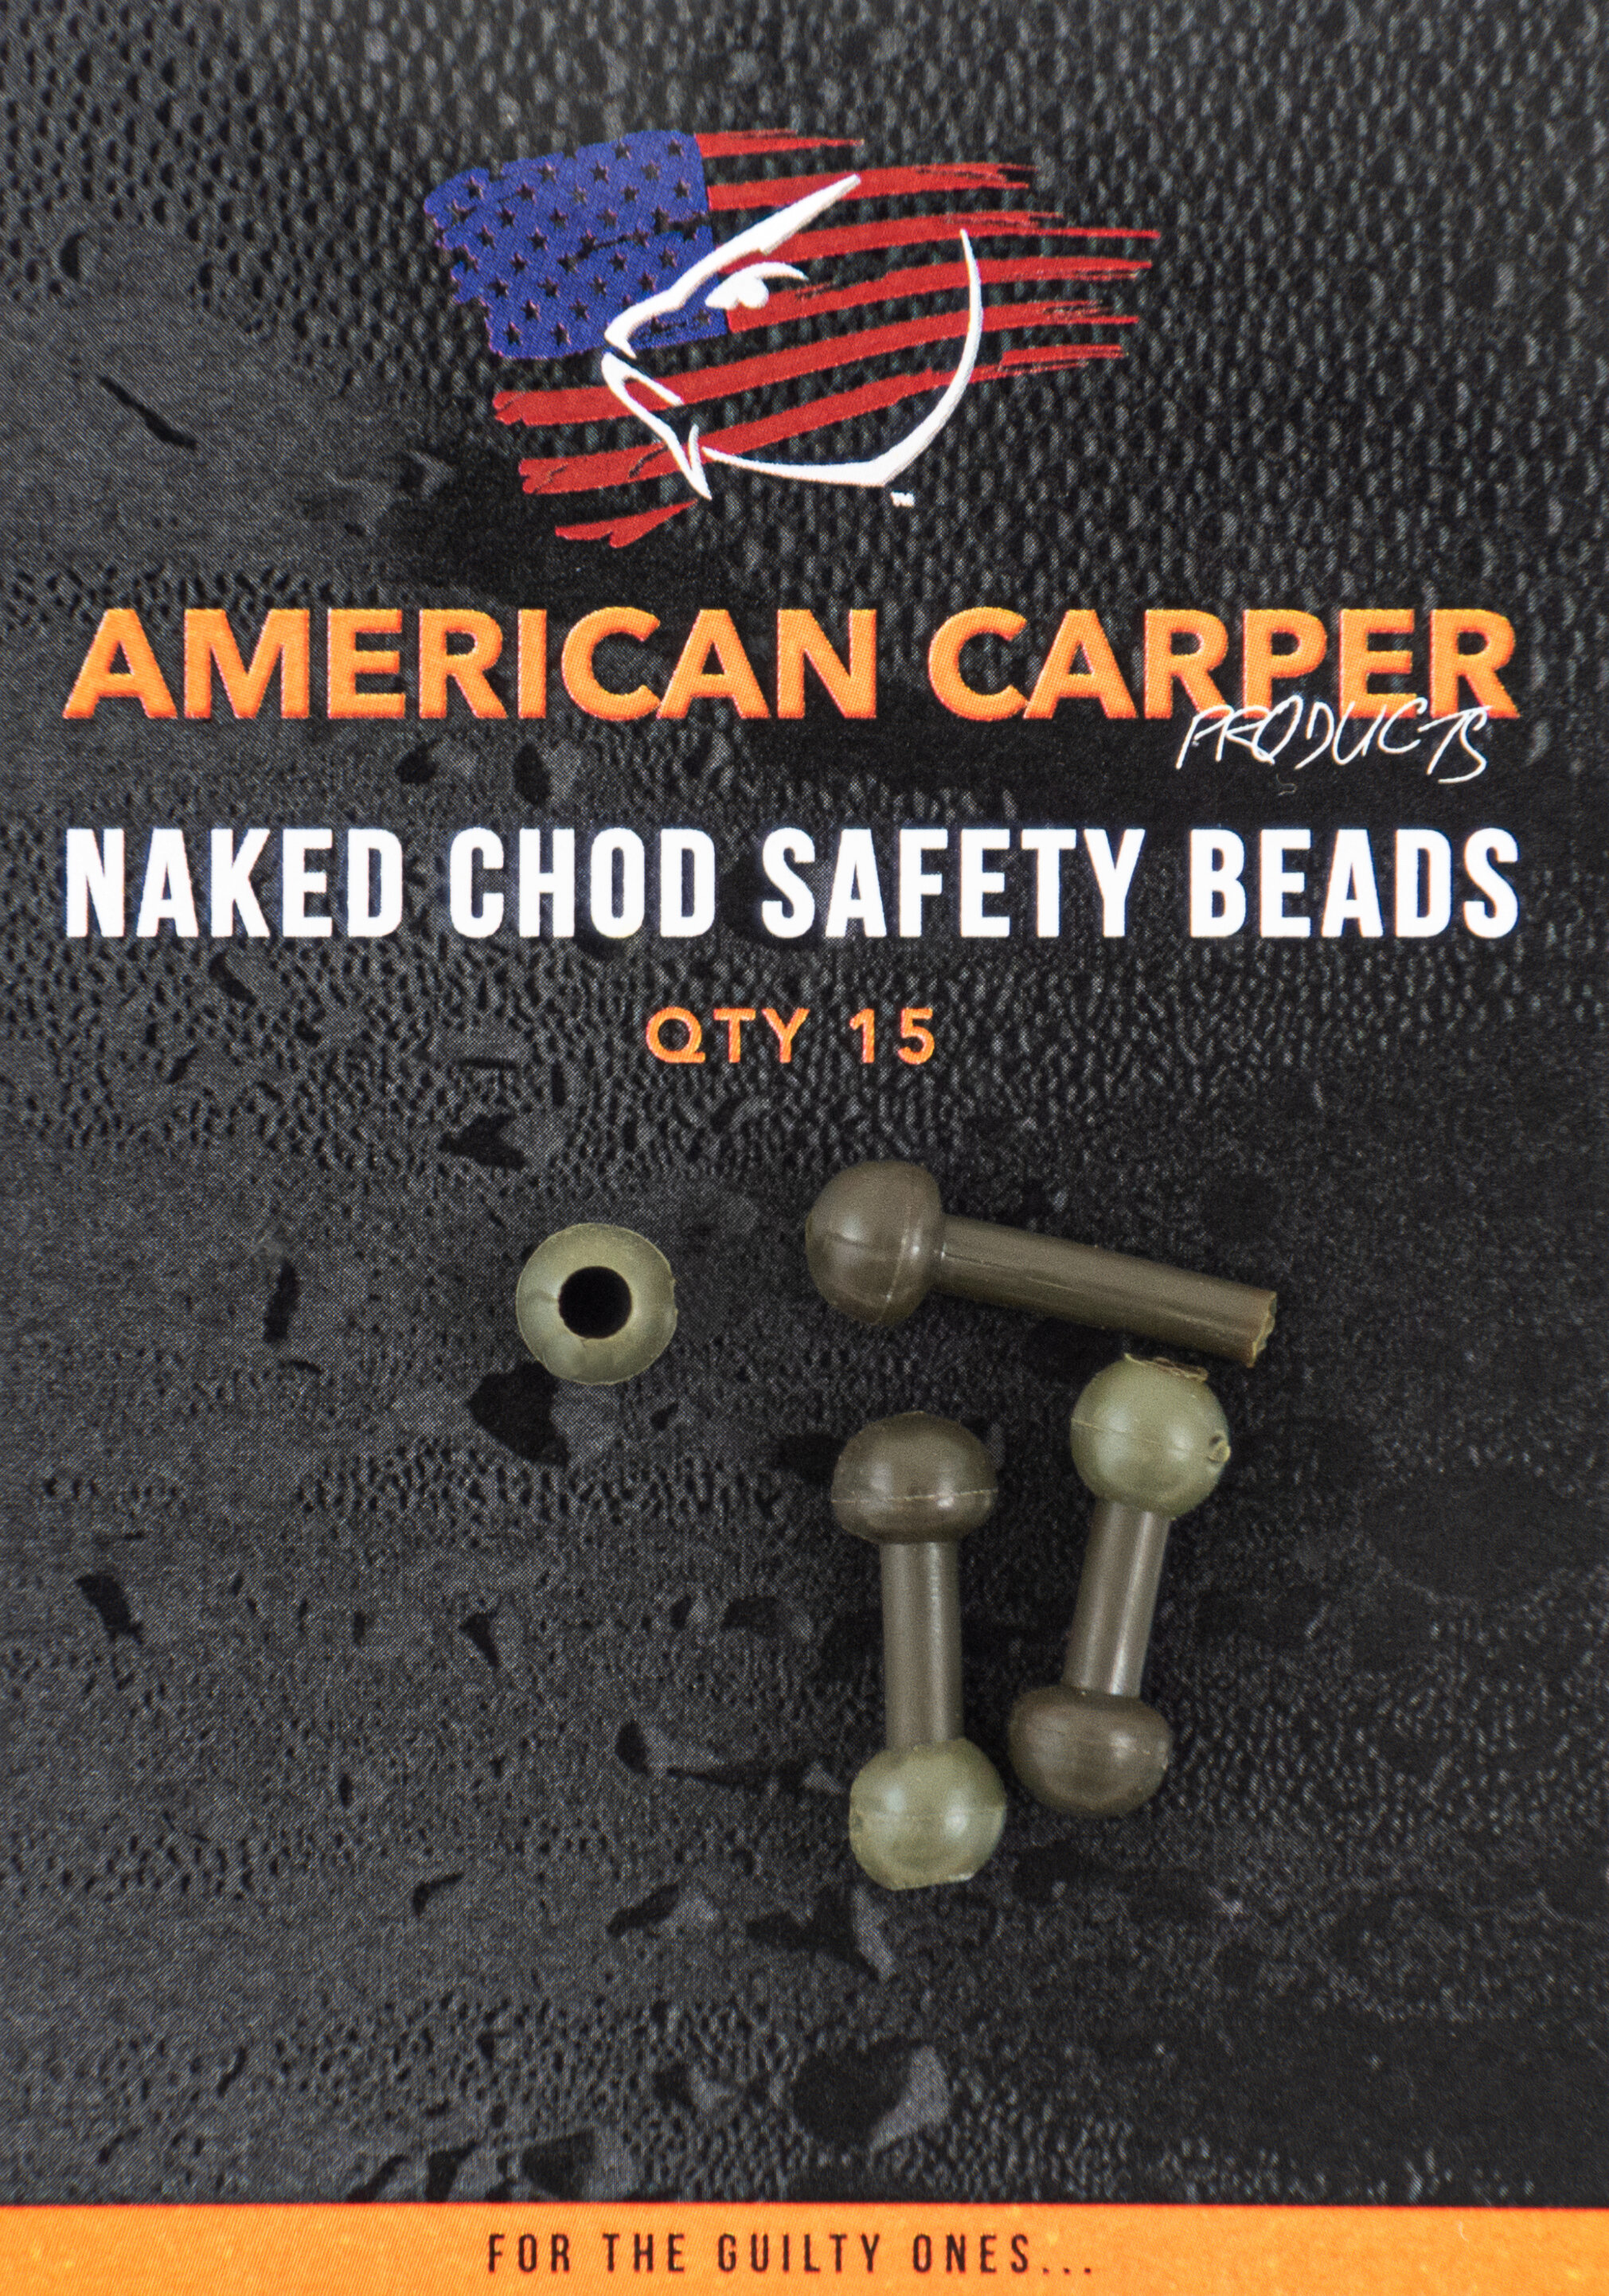 NAKED CHOD SAFETY BEADS CROPPED.jpg